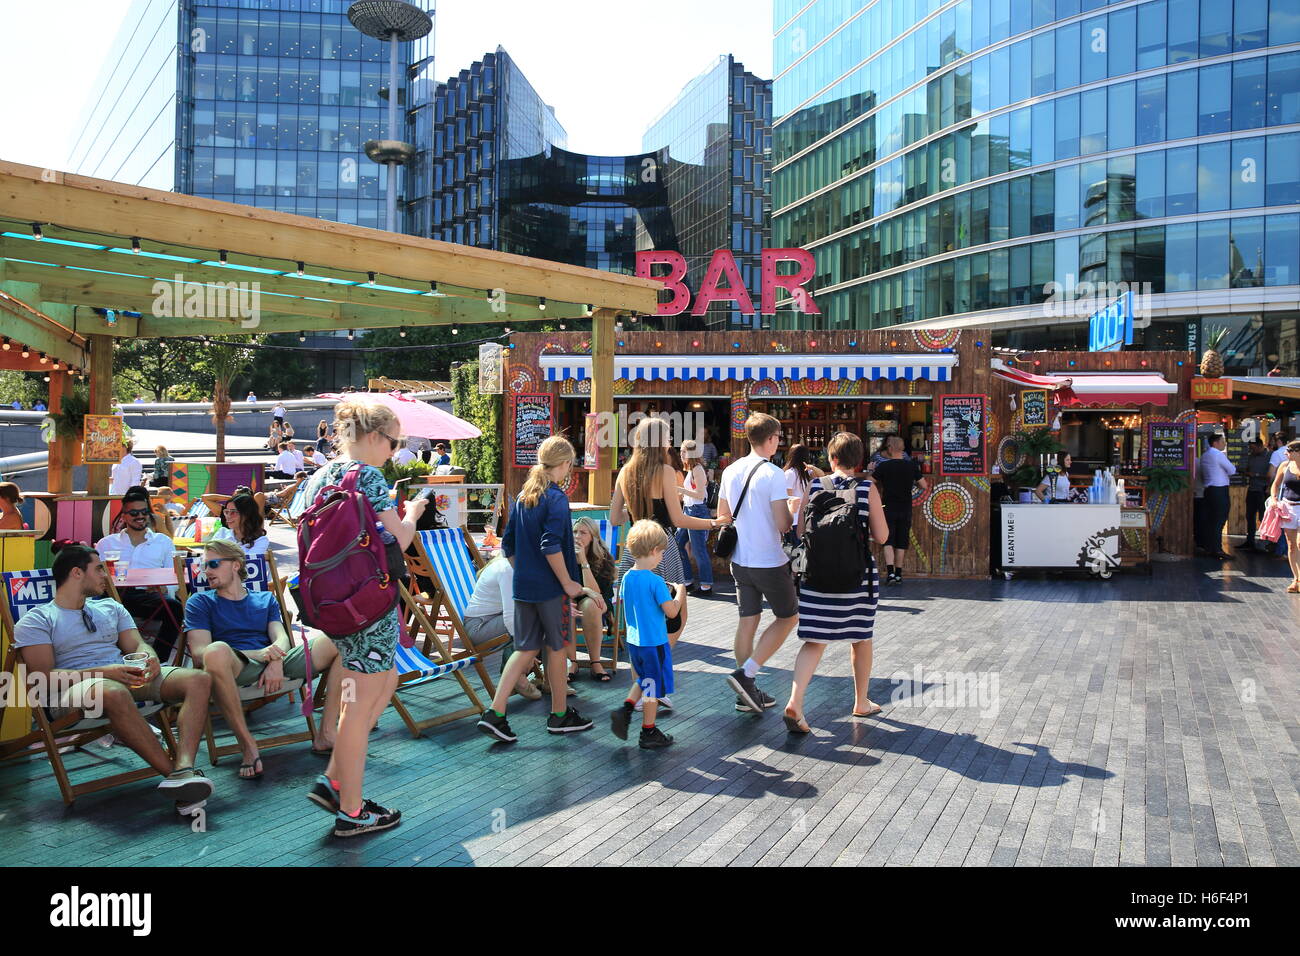 London Riviera, the summer pop up bar and kitchen, at More London Riverside, in Southwark, England, UK Stock Photo